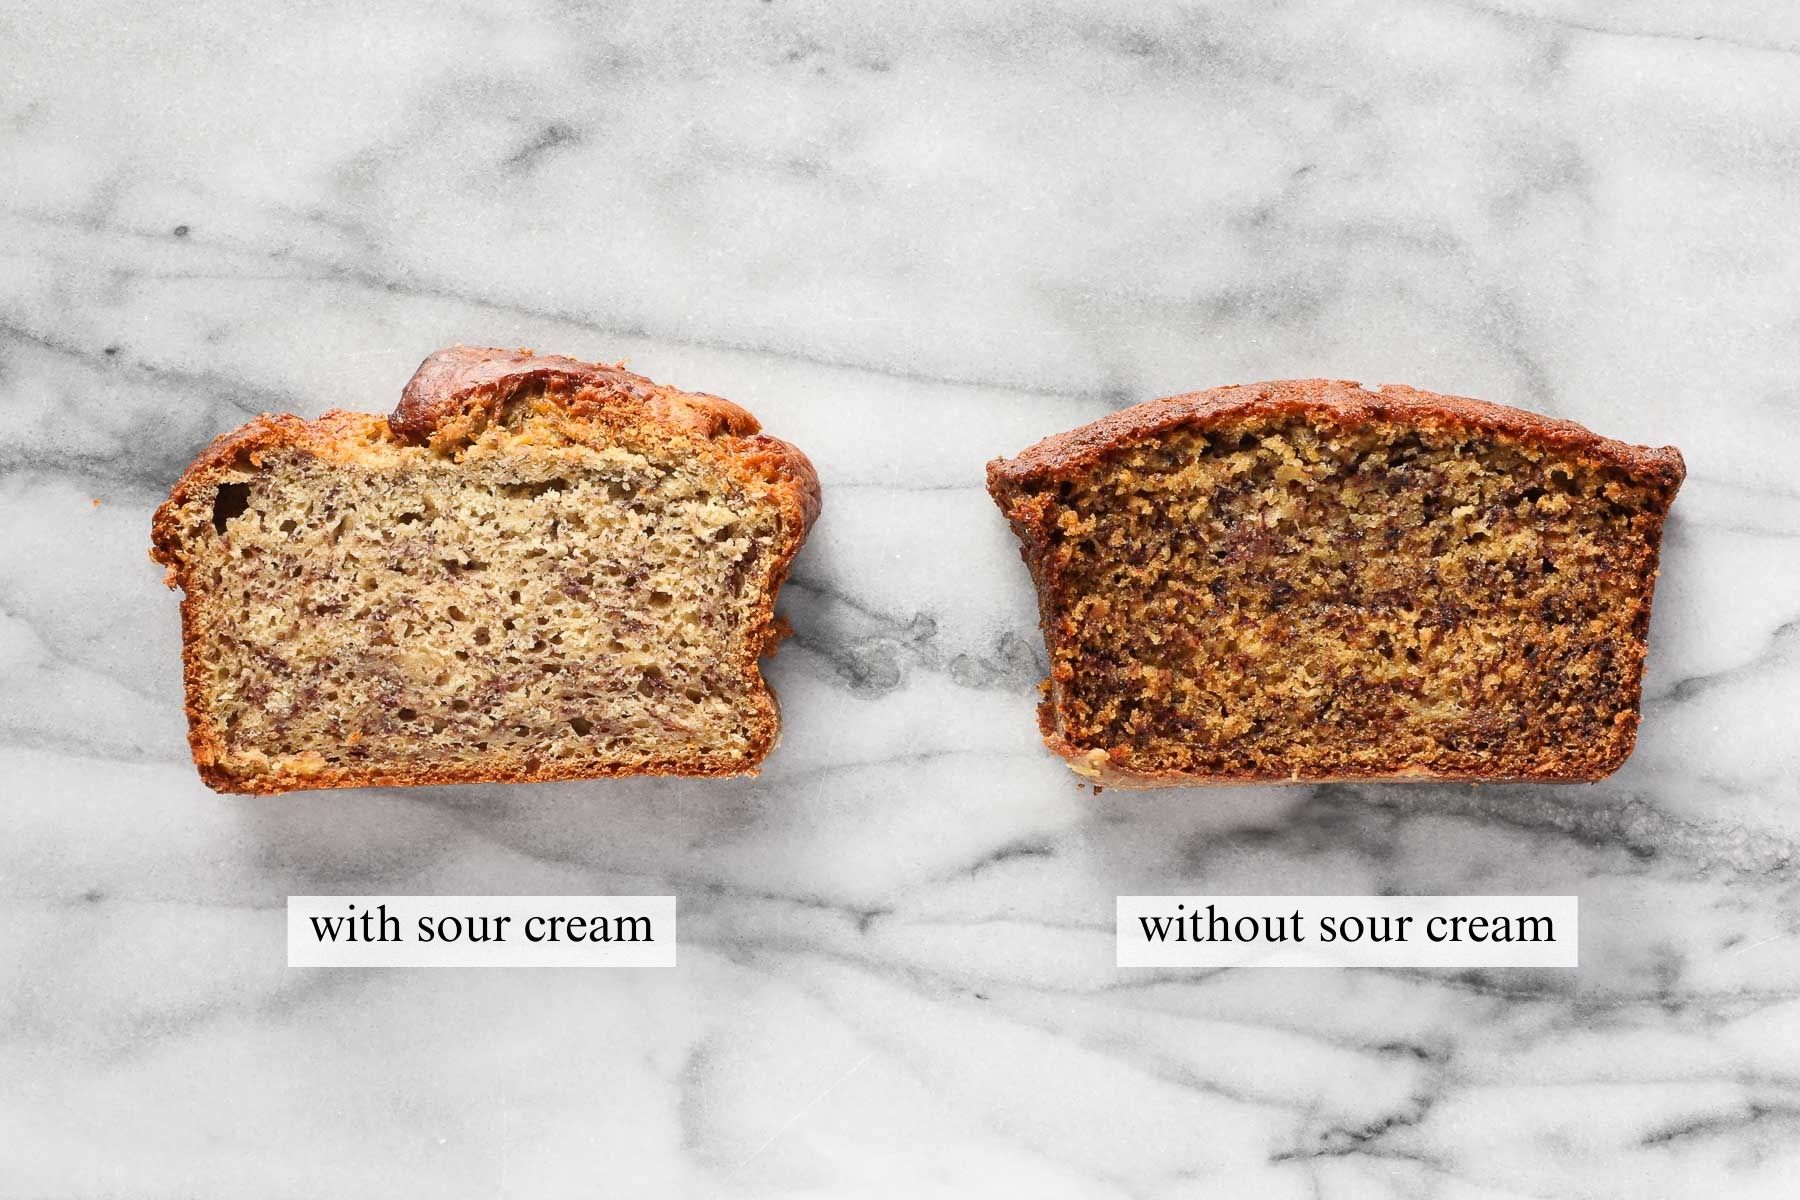 A slice of Einkorn banana bread made with sour cream next to a slice of Einkorn banana bread made without sour cream.